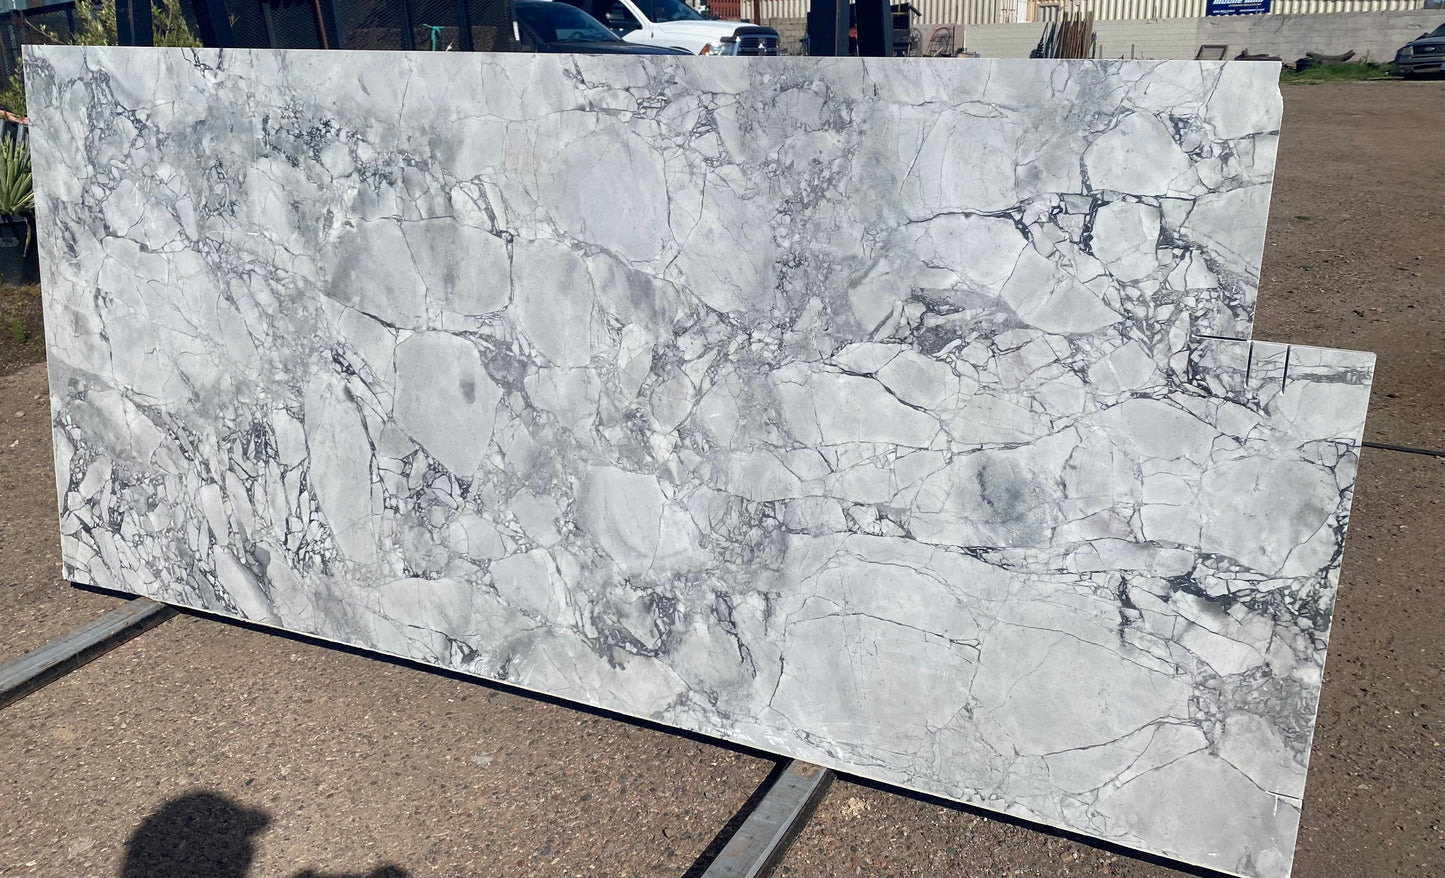 3cm, Crystals, Glossy, gray, Gray Veins, Grey, Grey Veins, Light Veins, Marble, Matte, Outlet Material, Rare Find, Remnant, remnants, thickness-3cm, Veins, white Marble Remnants